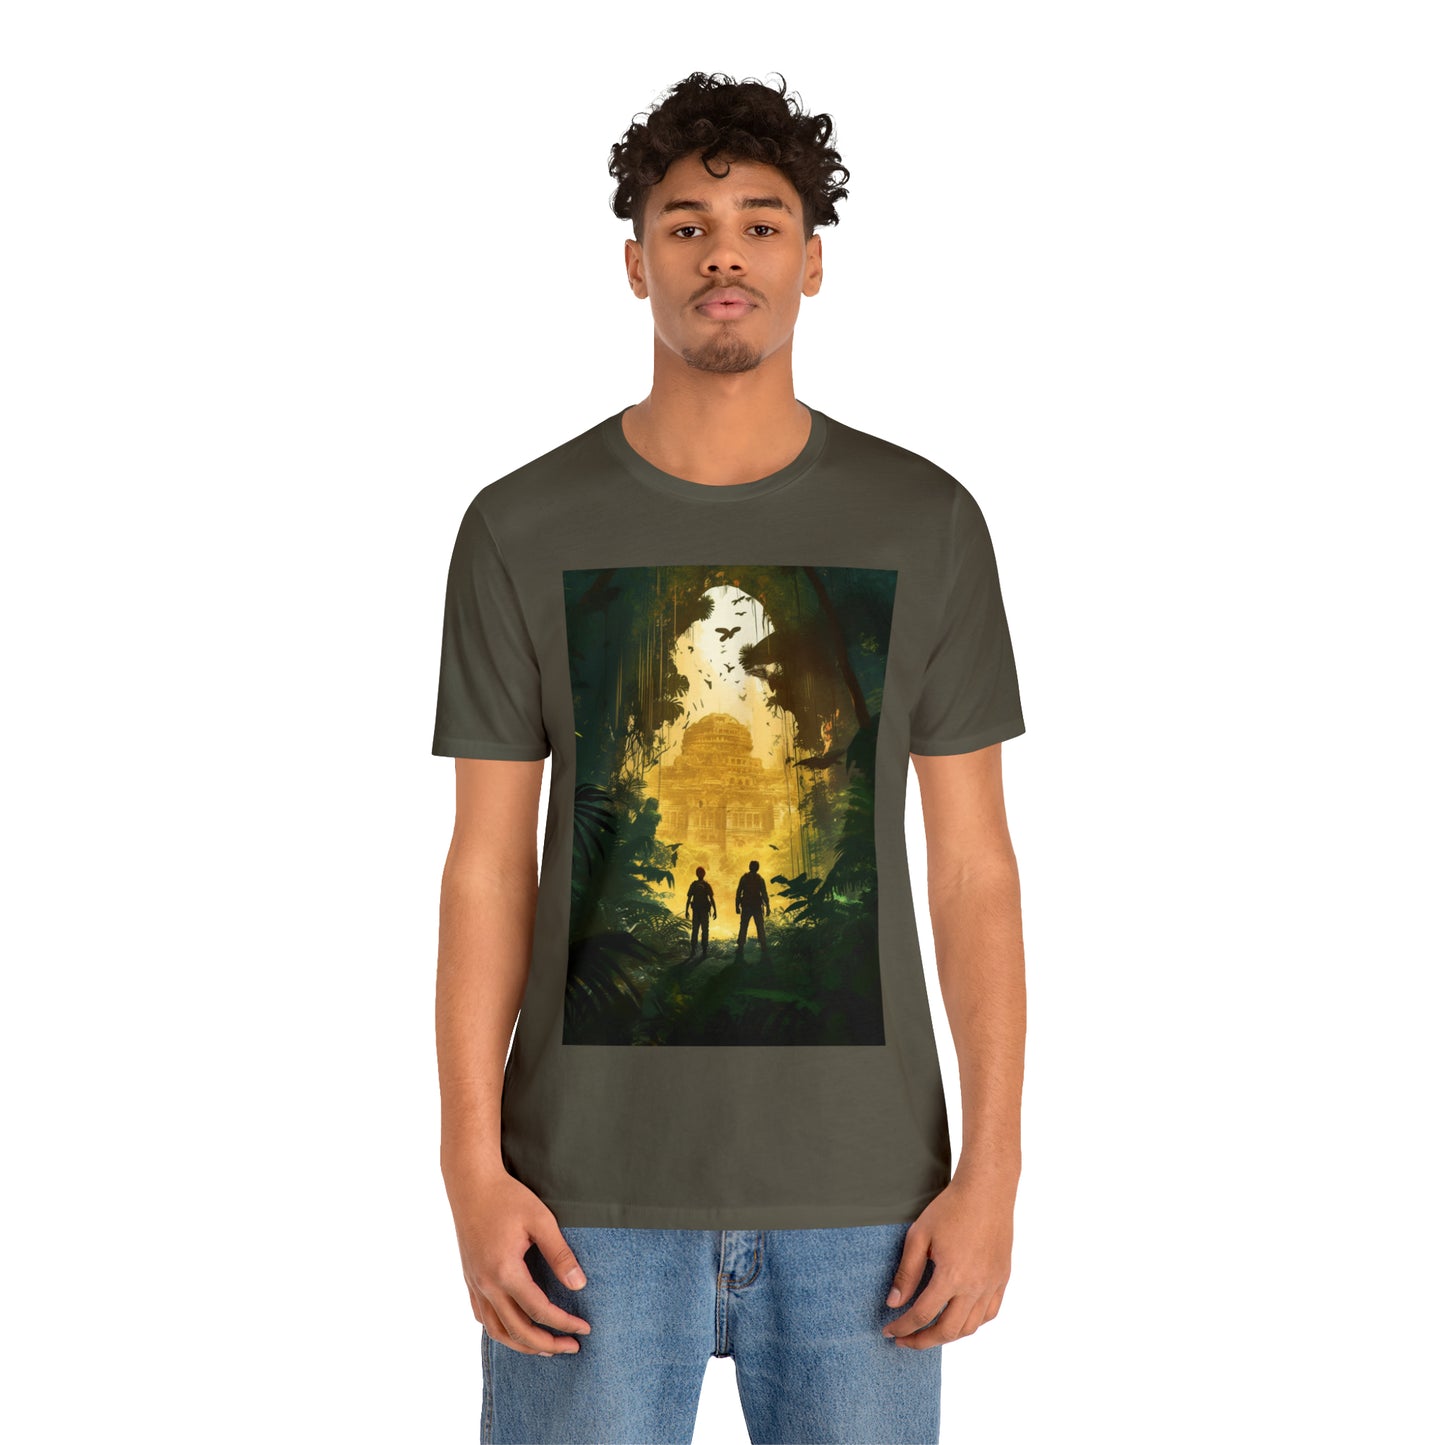 army-quest-thread-tee-shirt-with-ruins-of-arnak-scene-on-front